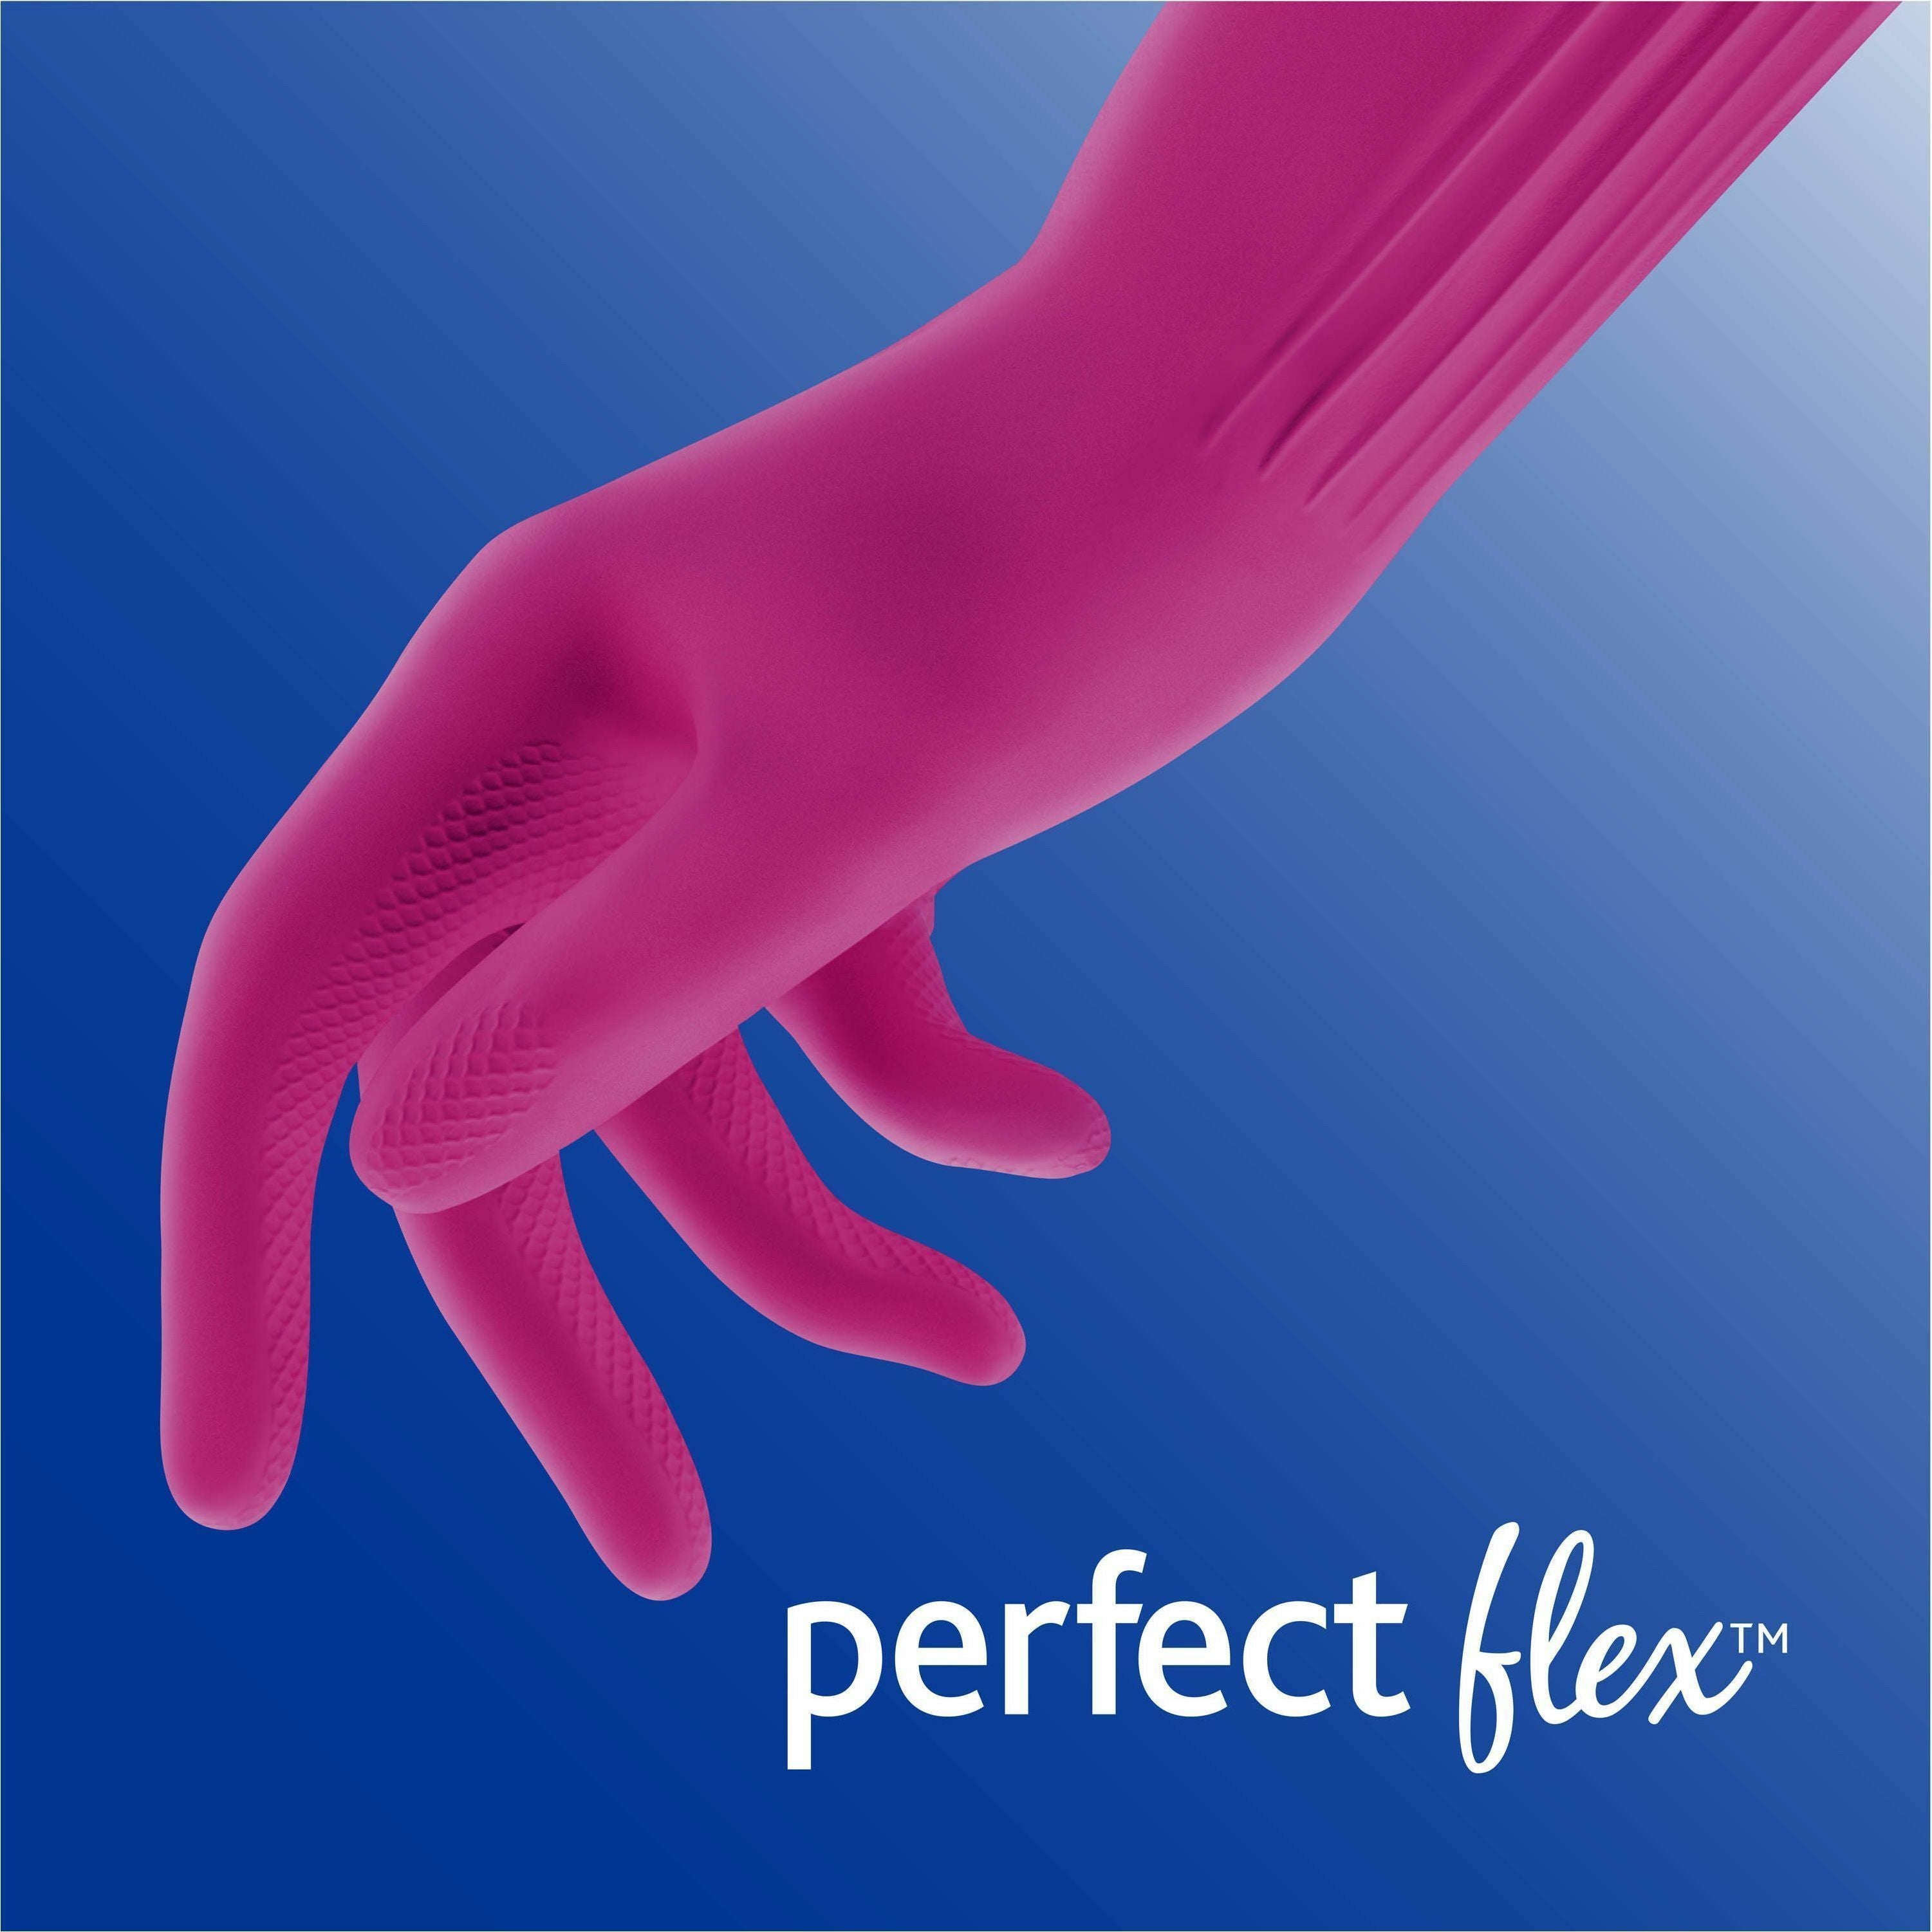 o-cedar-playtex-living-gloves-chemical-bacteria-protection-large-size-latex-neoprene-nitrile-pink-anti-microbial-reusable-durable-comfortable-odor-resistant-textured-palm-textured-fingertip-for-household-cleaning-2-pair-14_fhp166120 - 3